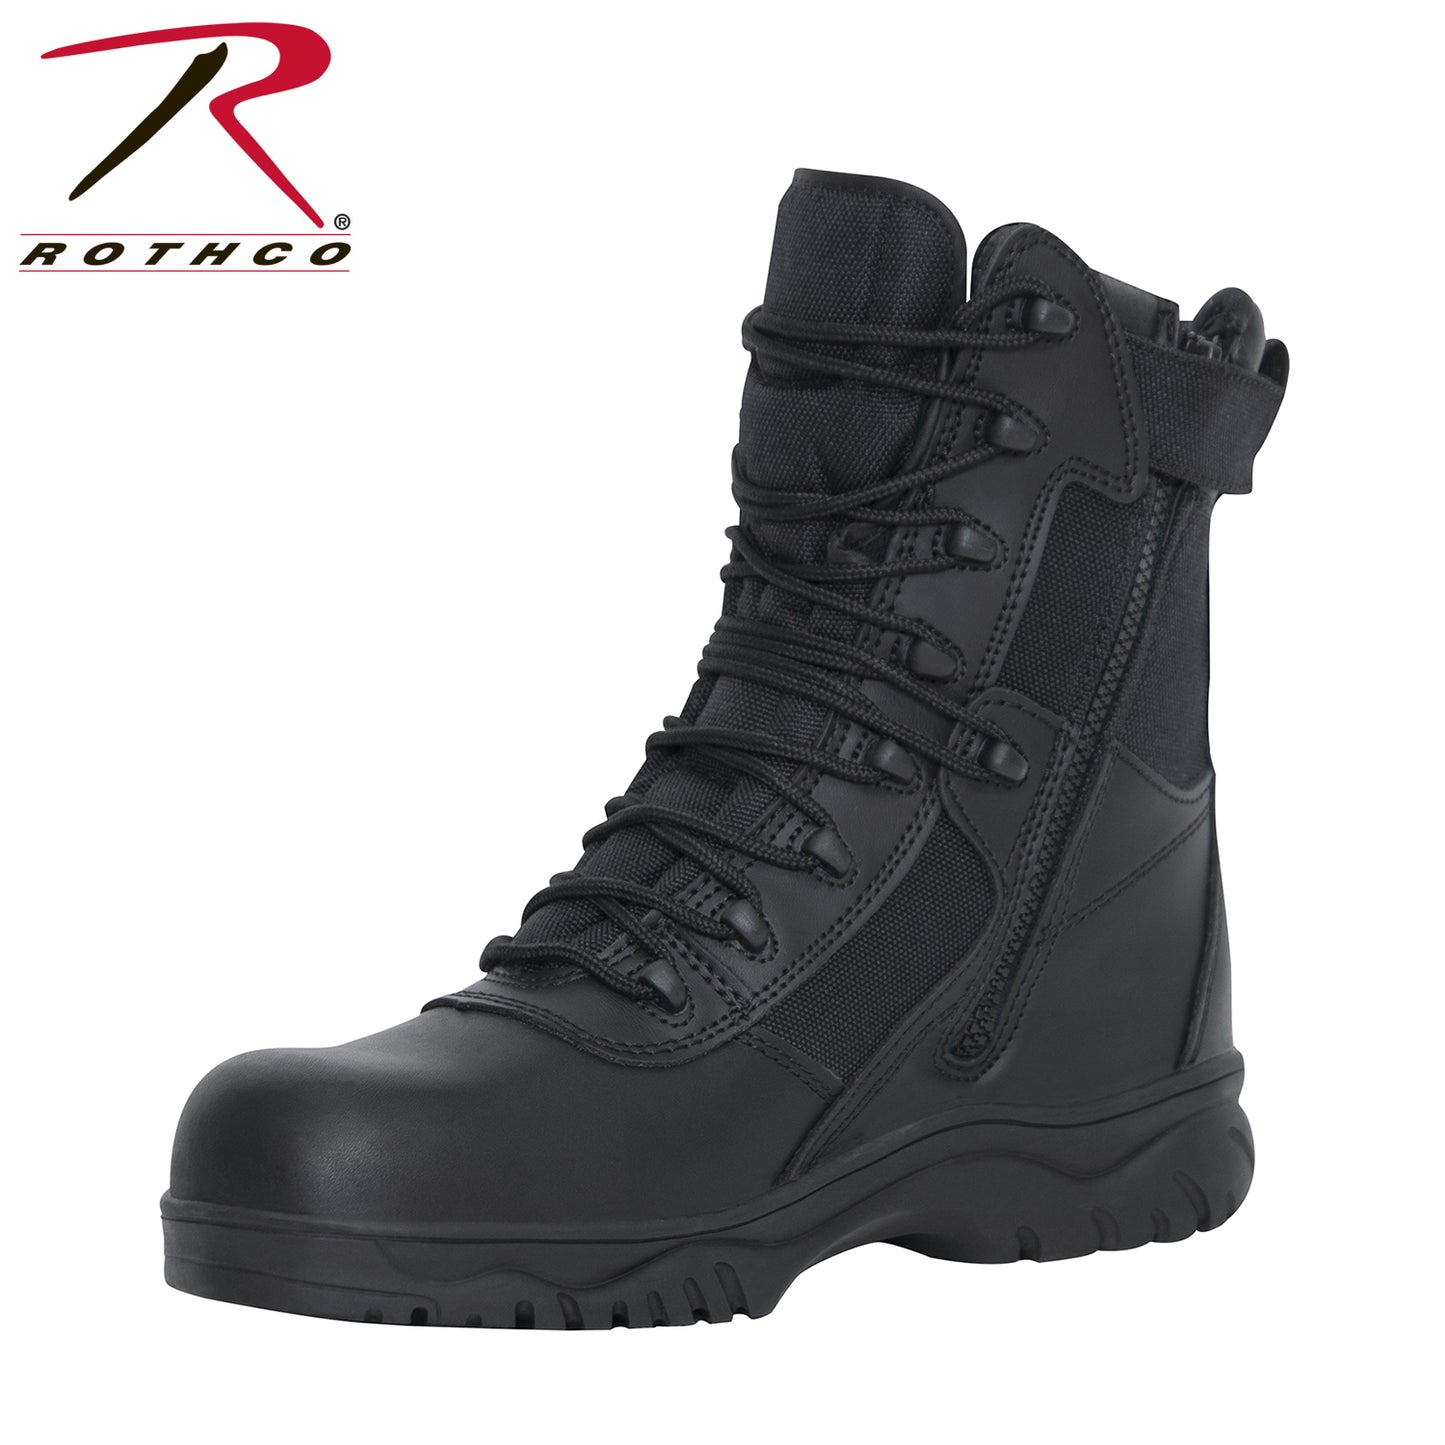 Milspec Forced Entry Tactical Boot With Side Zipper & Composite Toe - 8 Inch New Arrivals MilTac Tactical Military Outdoor Gear Australia